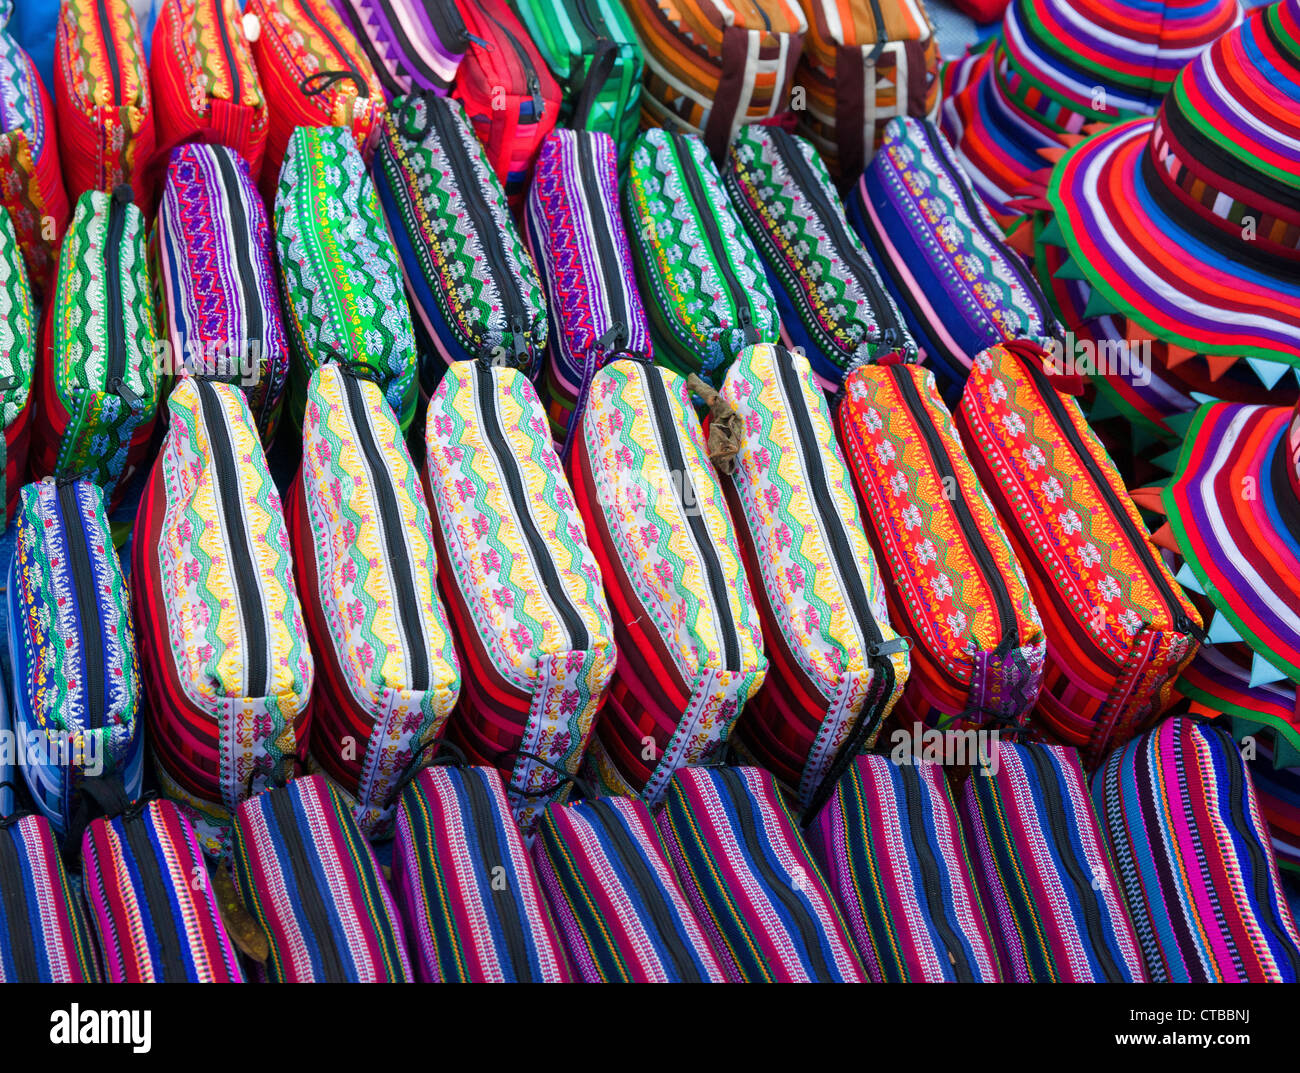 bright colourful purses or bags for sale in thailand Stock Photo